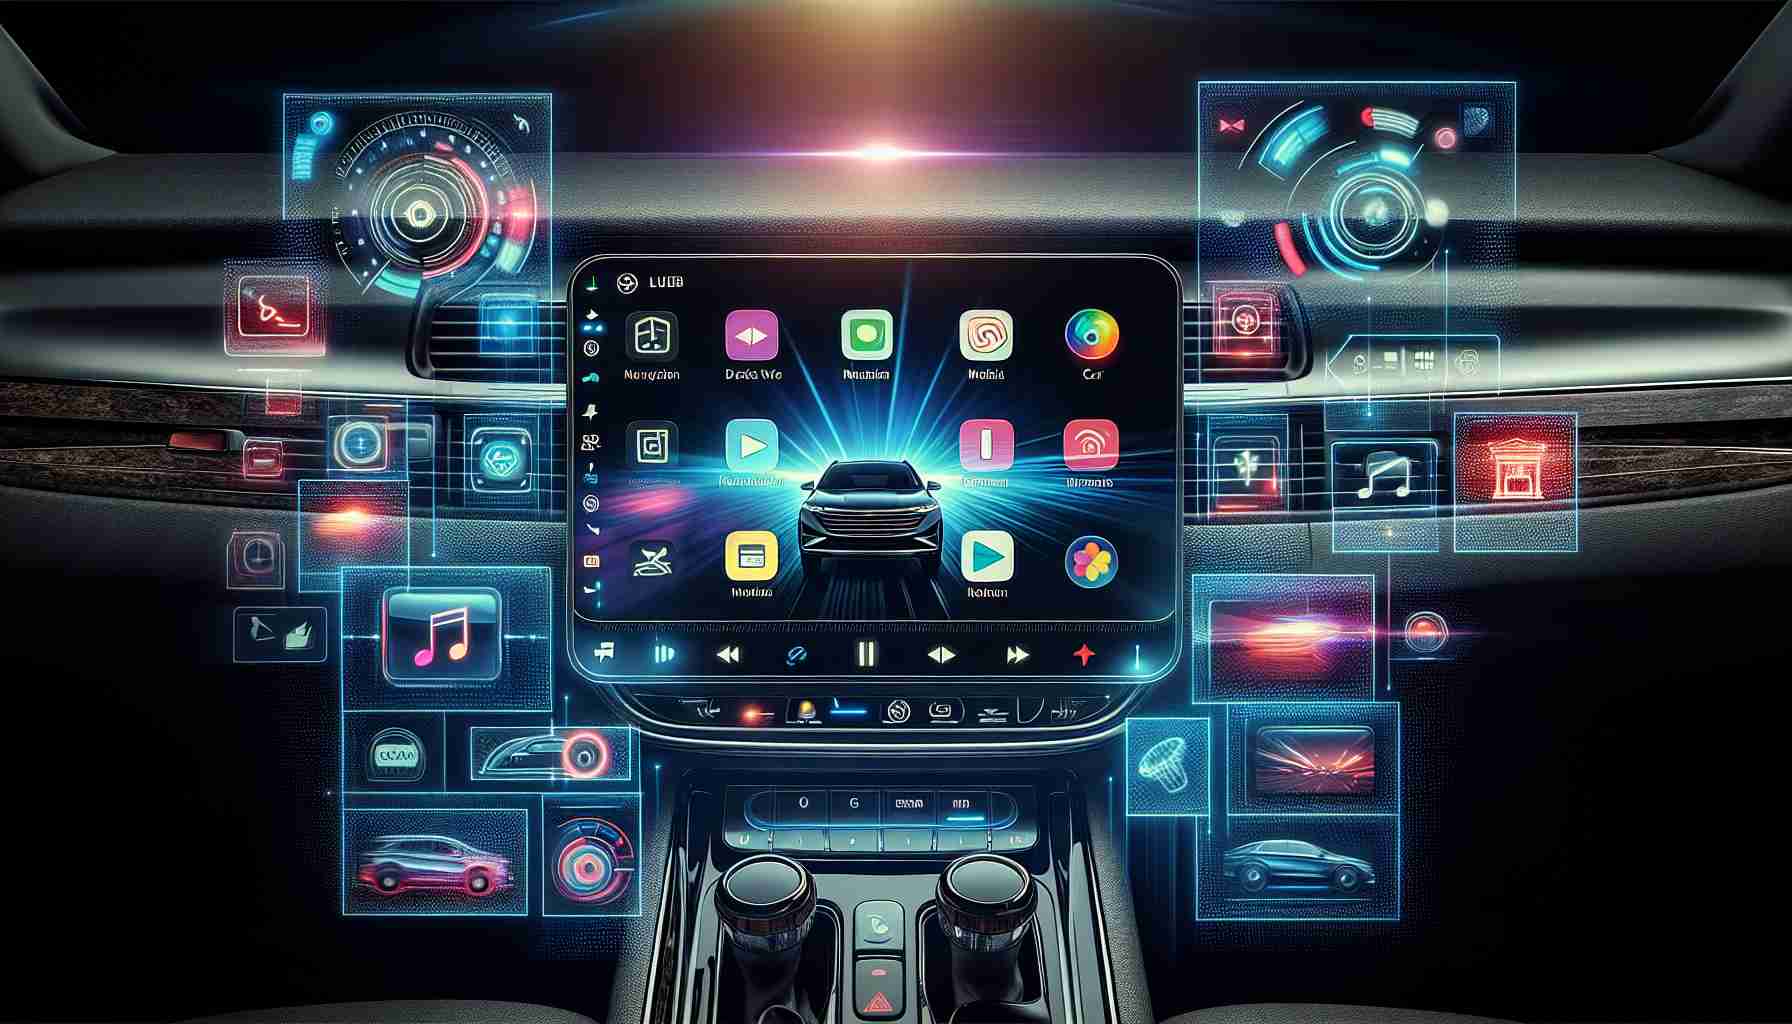 Android Auto Advances with Exciting Entertainment and Web Features